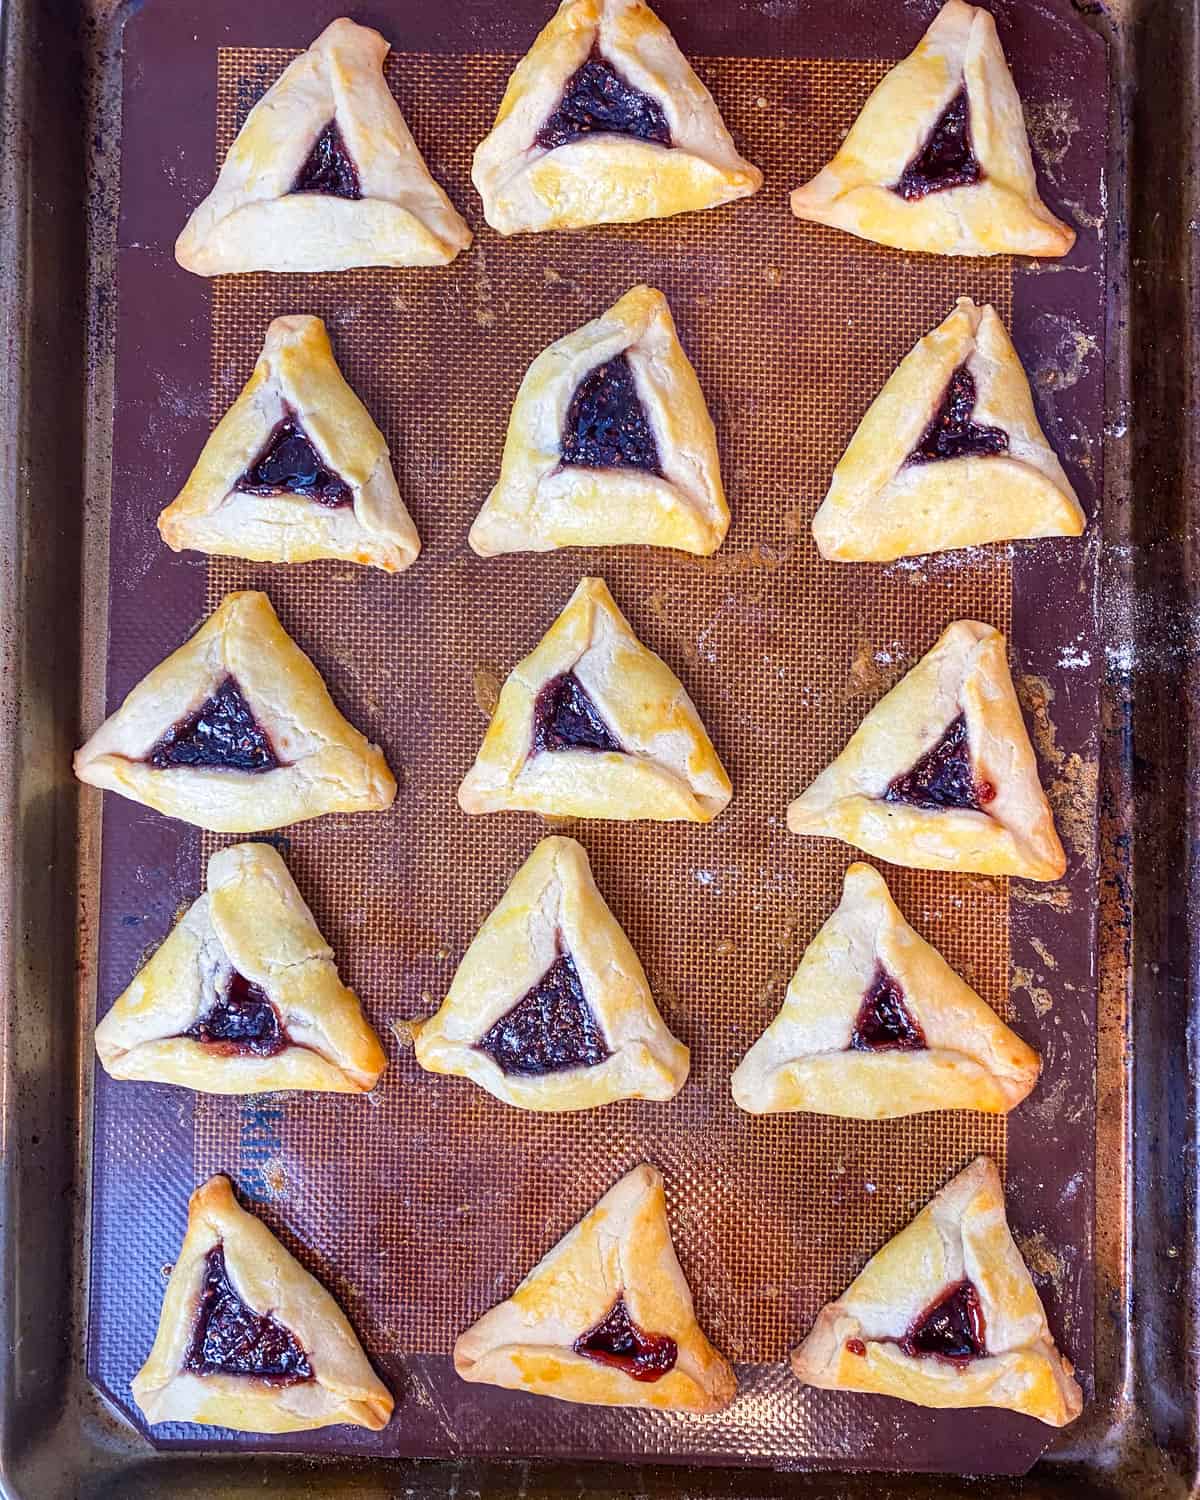 Bake the hamantaschen cookies at 350 degrees Fahrenheit until lightly golden brown, for about 22-25 minutes.